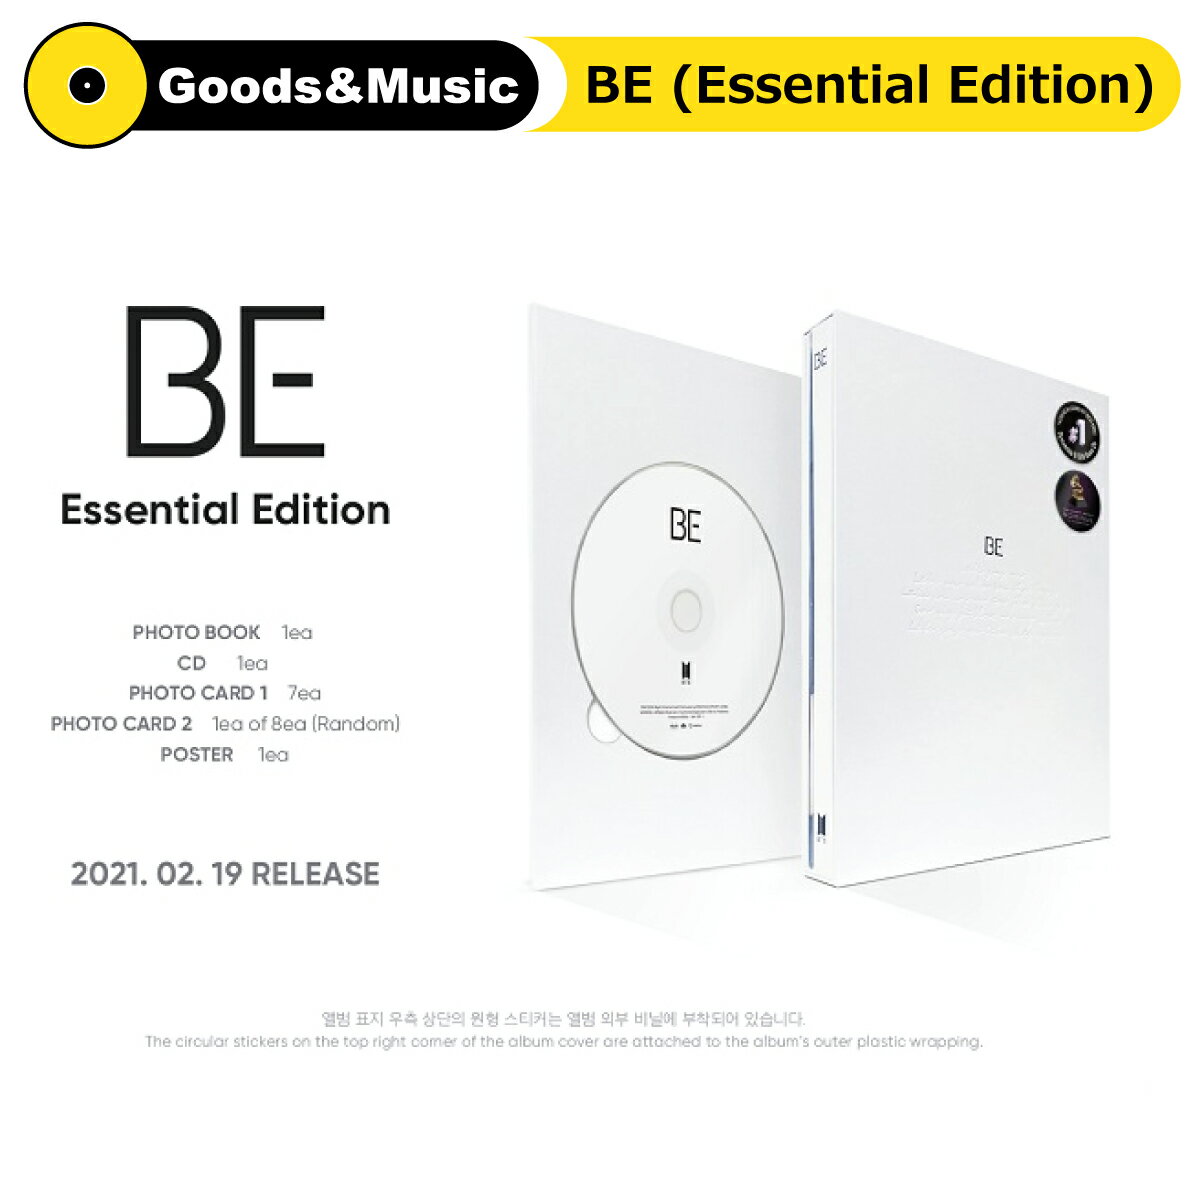  aI BTS BE ESSENTIAL EDITION heNc BE r GbZV |X^[t  S 